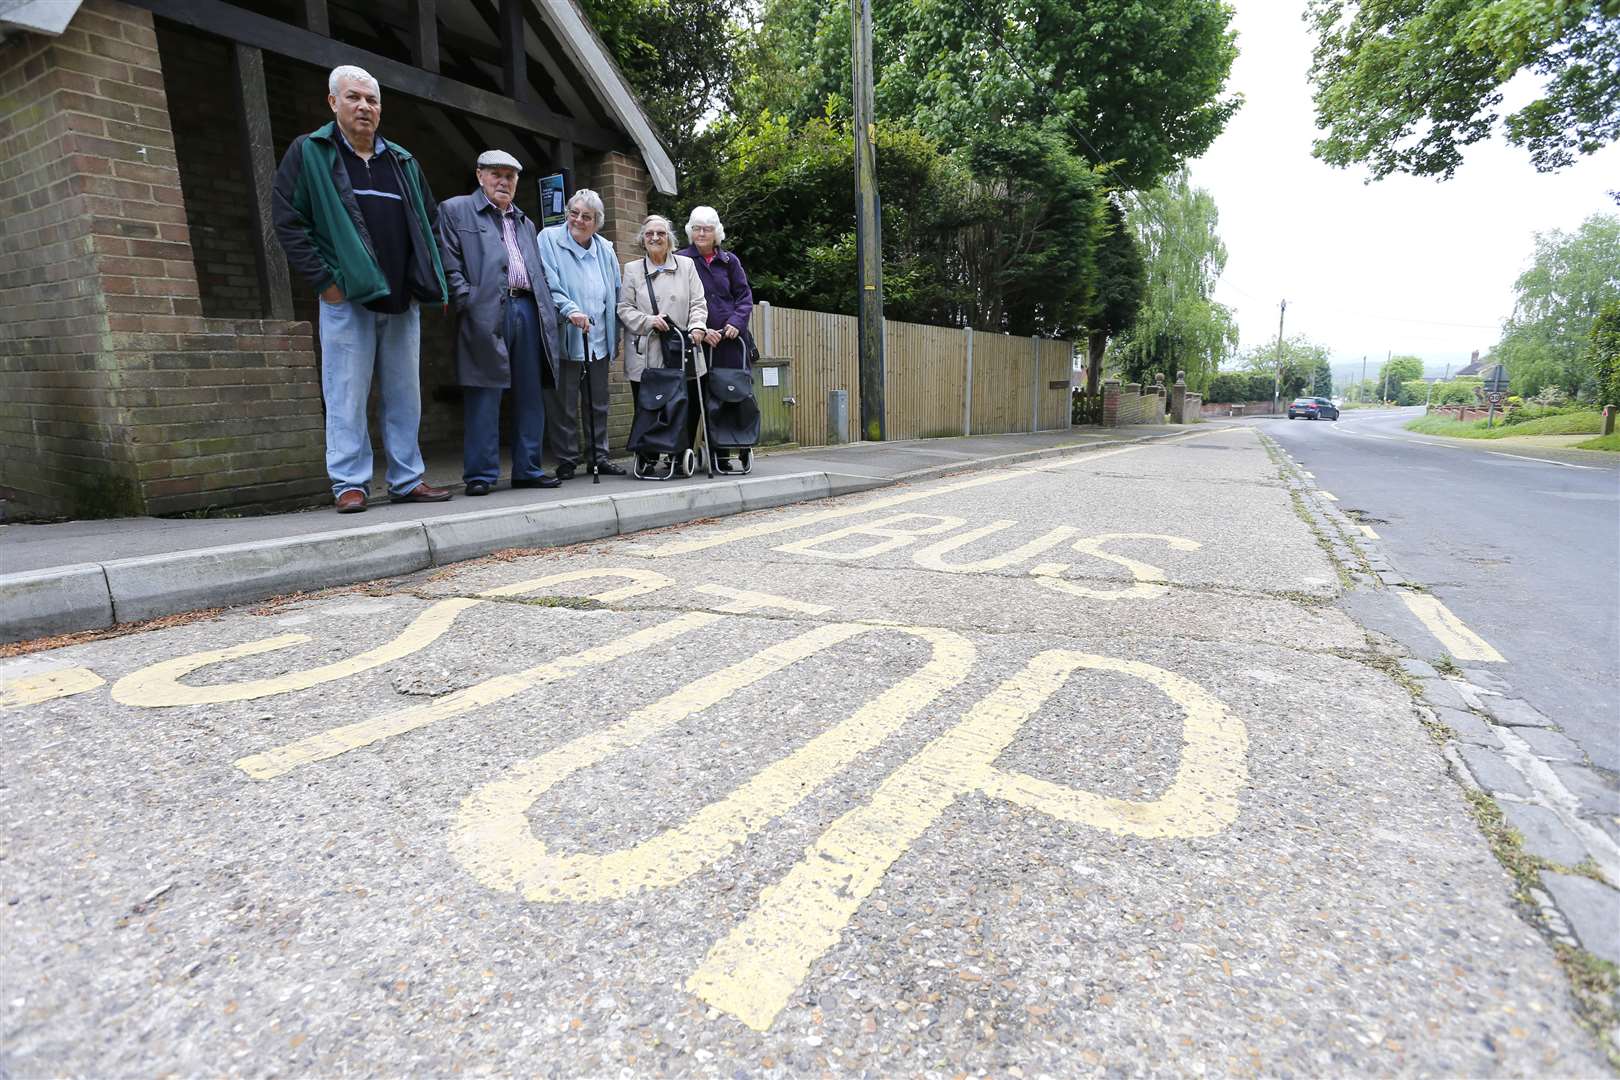 Bus users in Detling unhappy that the bus service to and from the village is about to be cut